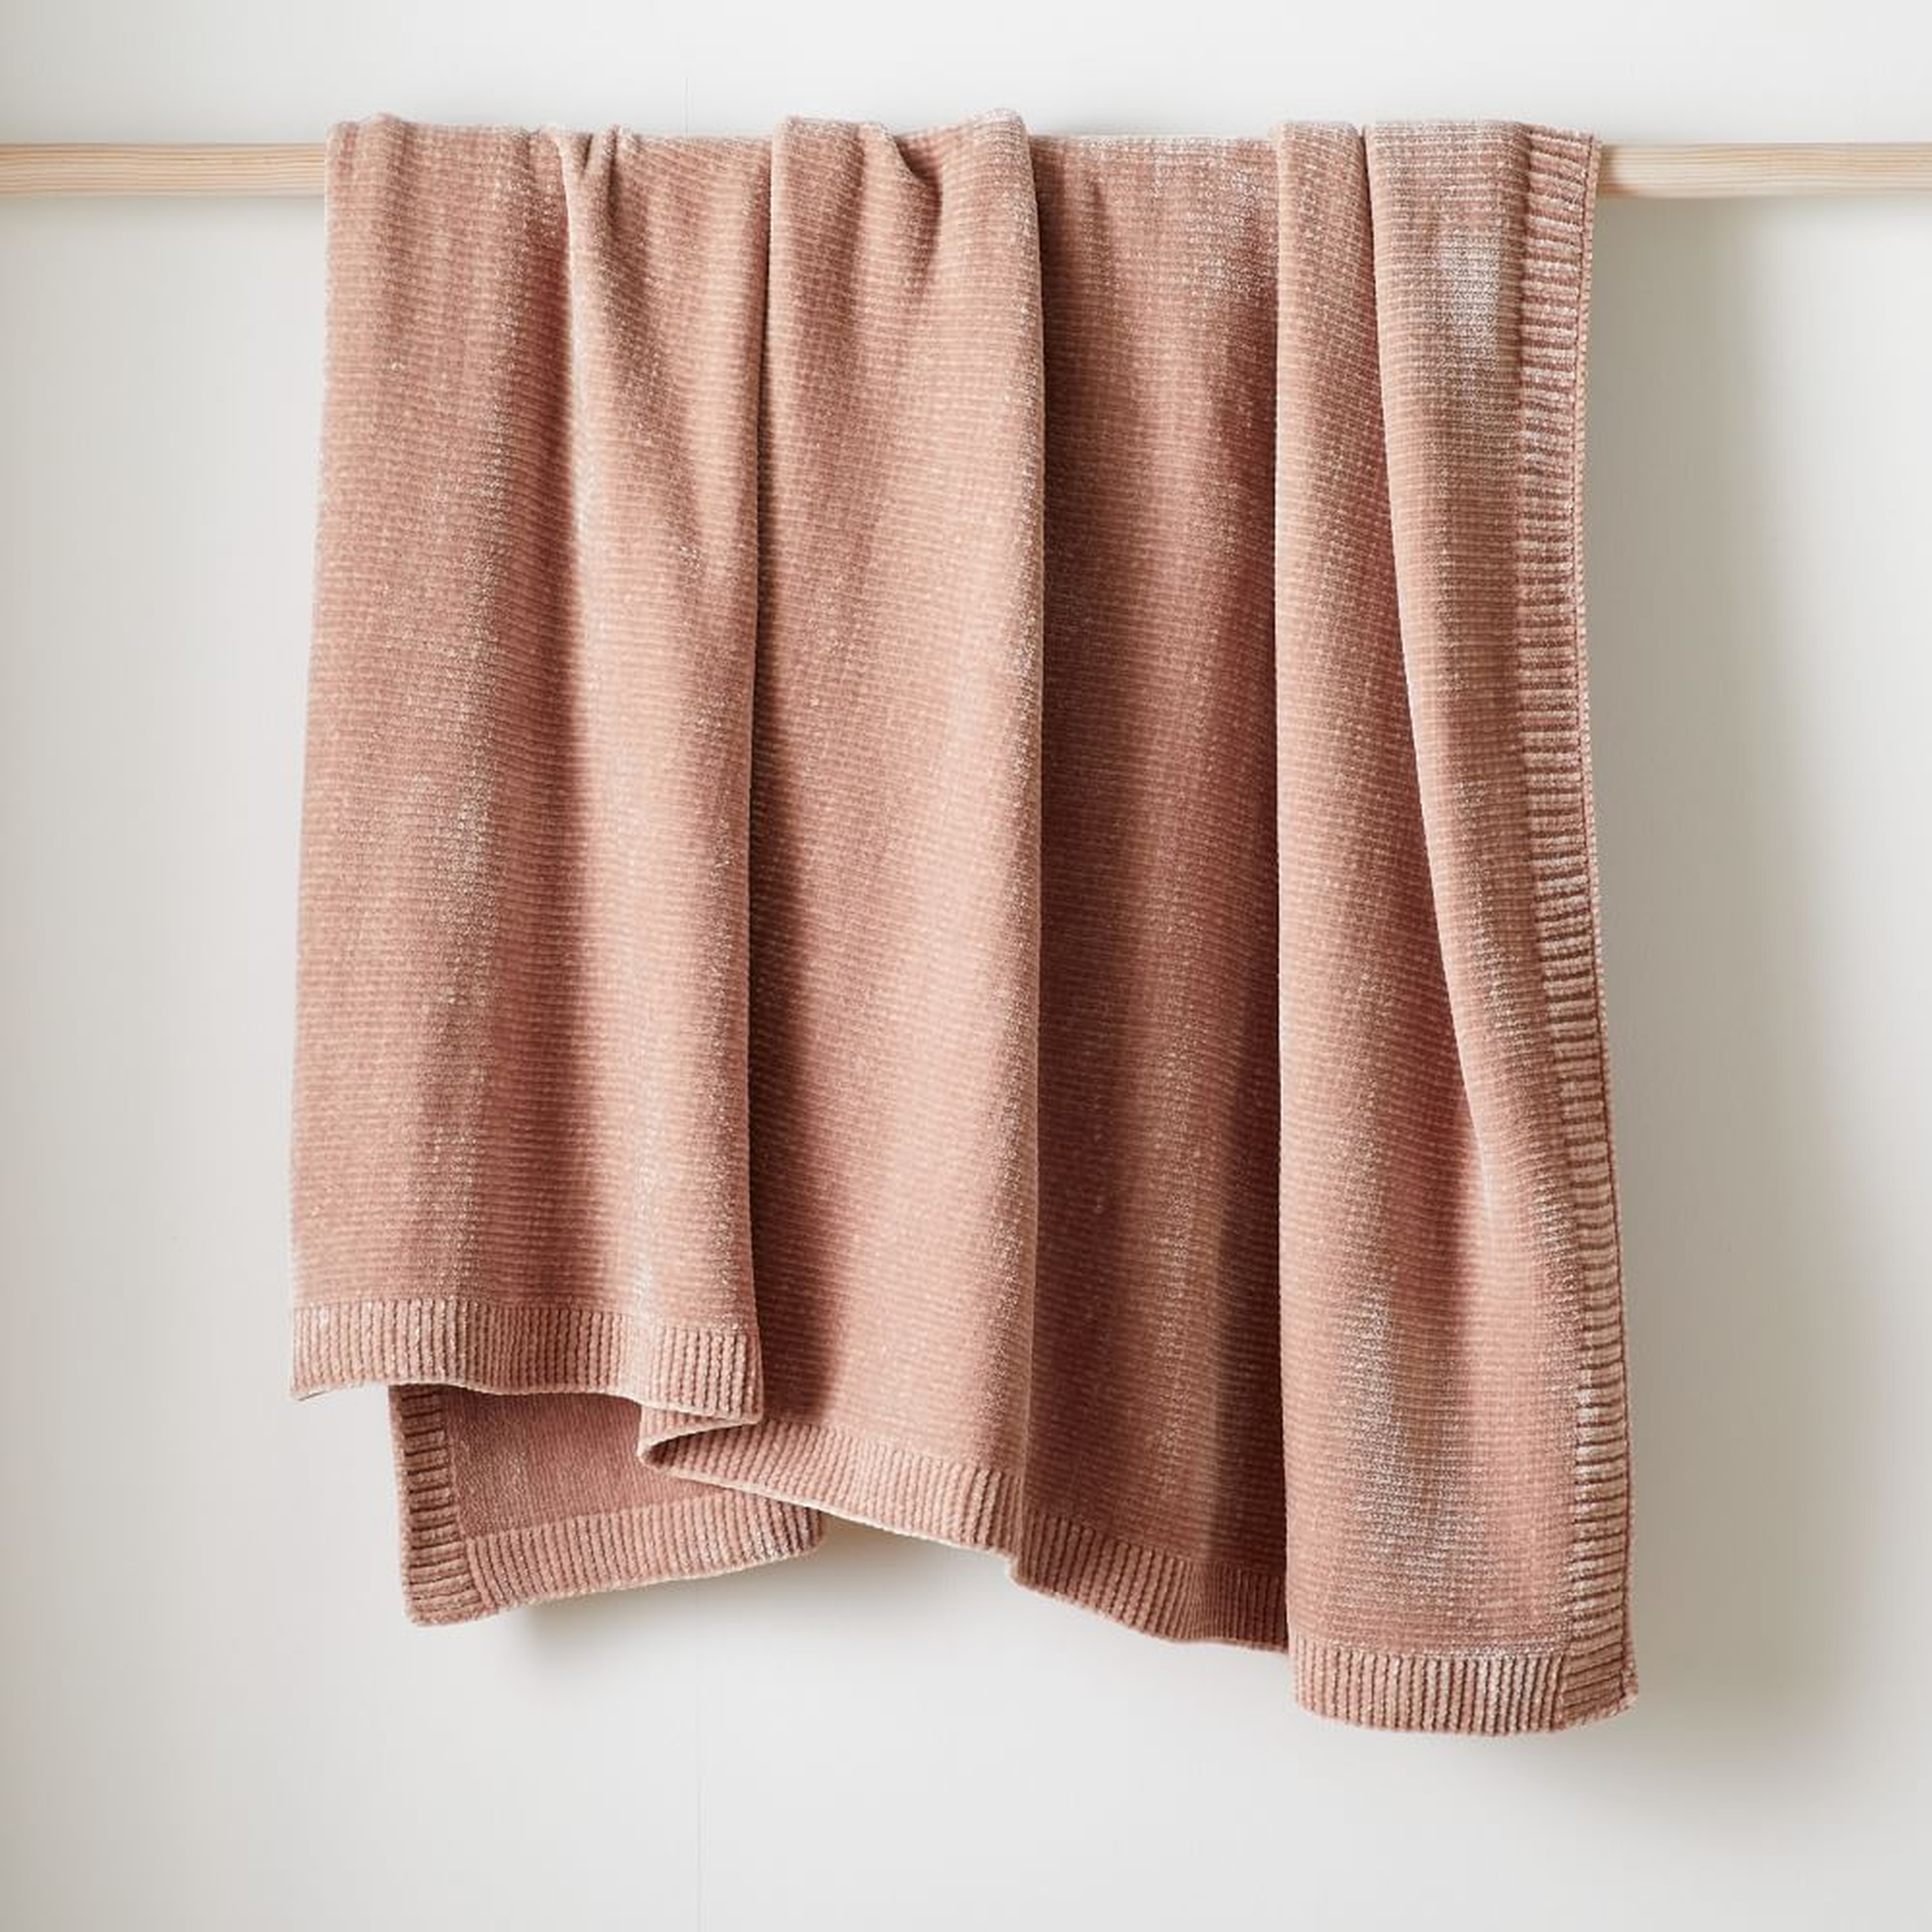 Luxe Chenille Throw, Dusty Blush - West Elm